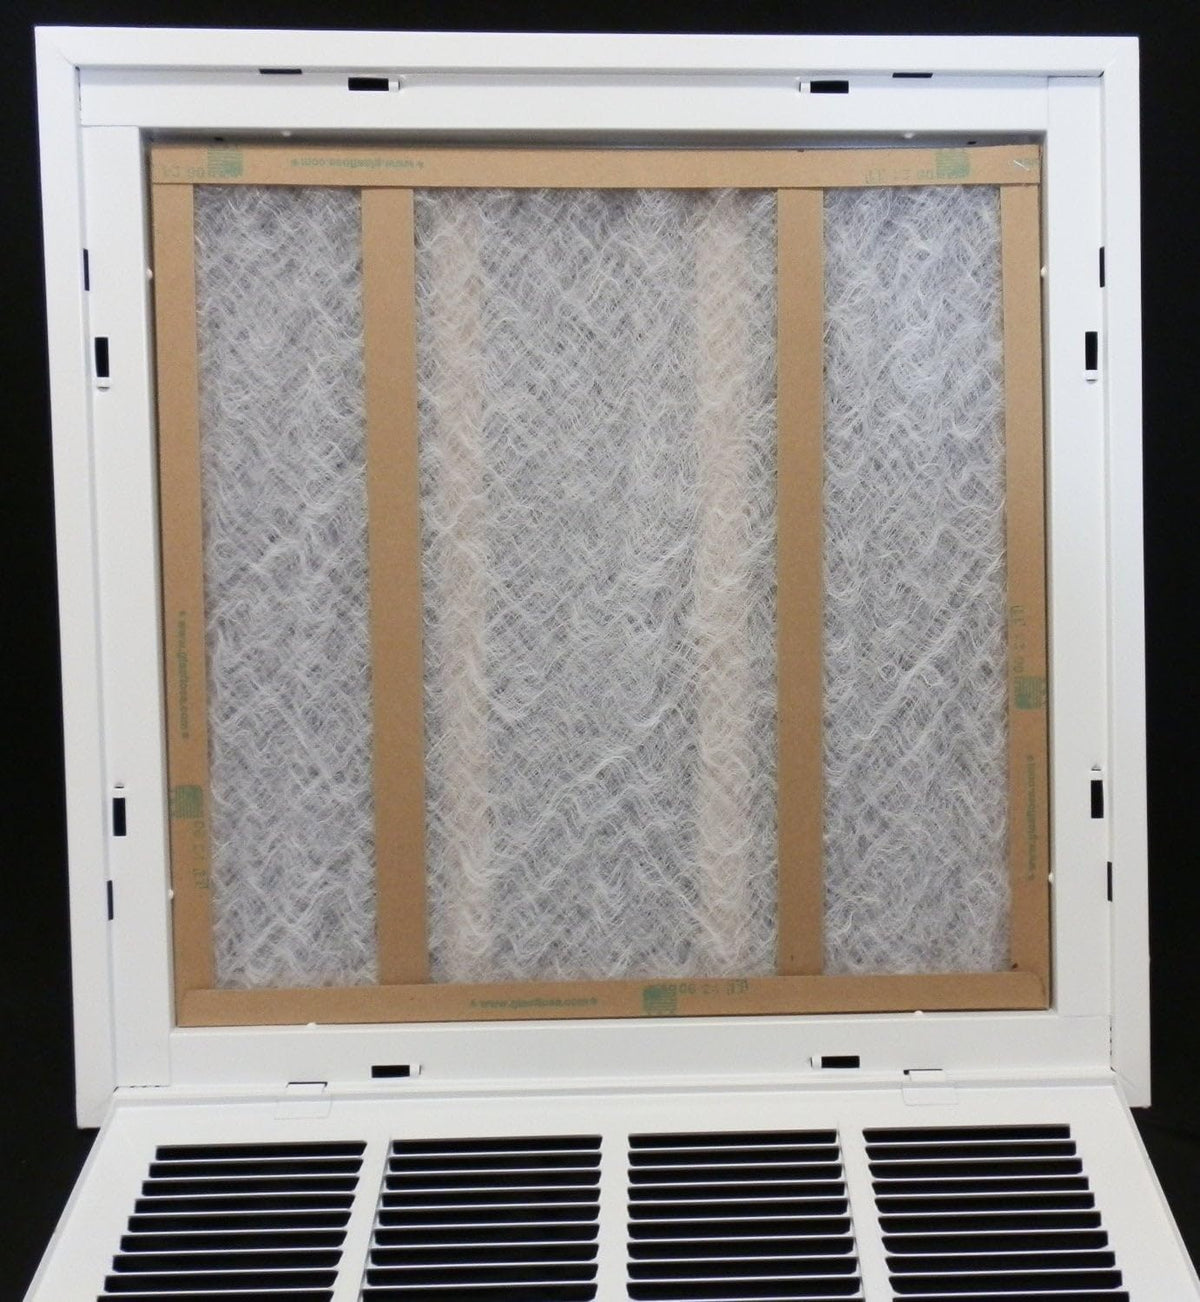 16&quot; X 34&quot; Steel Return Air Filter Grille for 1&quot; Filter - Removable Frame - [Outer Dimensions: 18 5/8&quot; X 36 5/8&quot;]